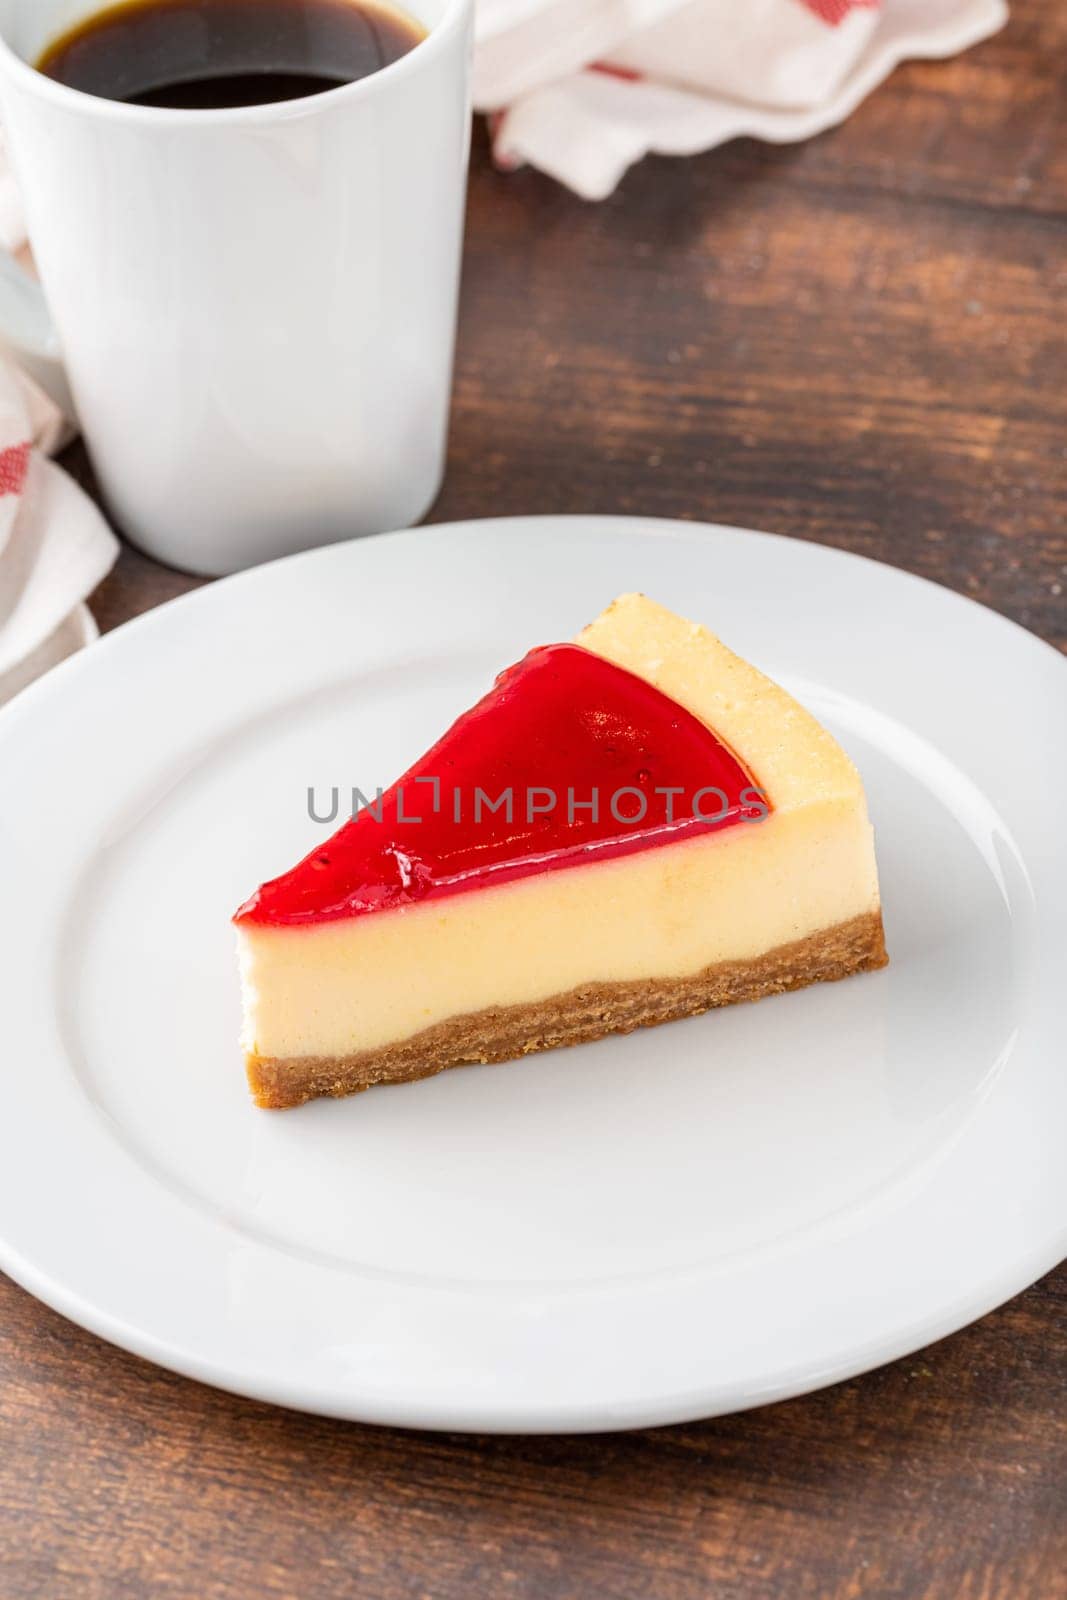 Delicious strawberry cheesecake with coffee next to it on wooden table by Sonat